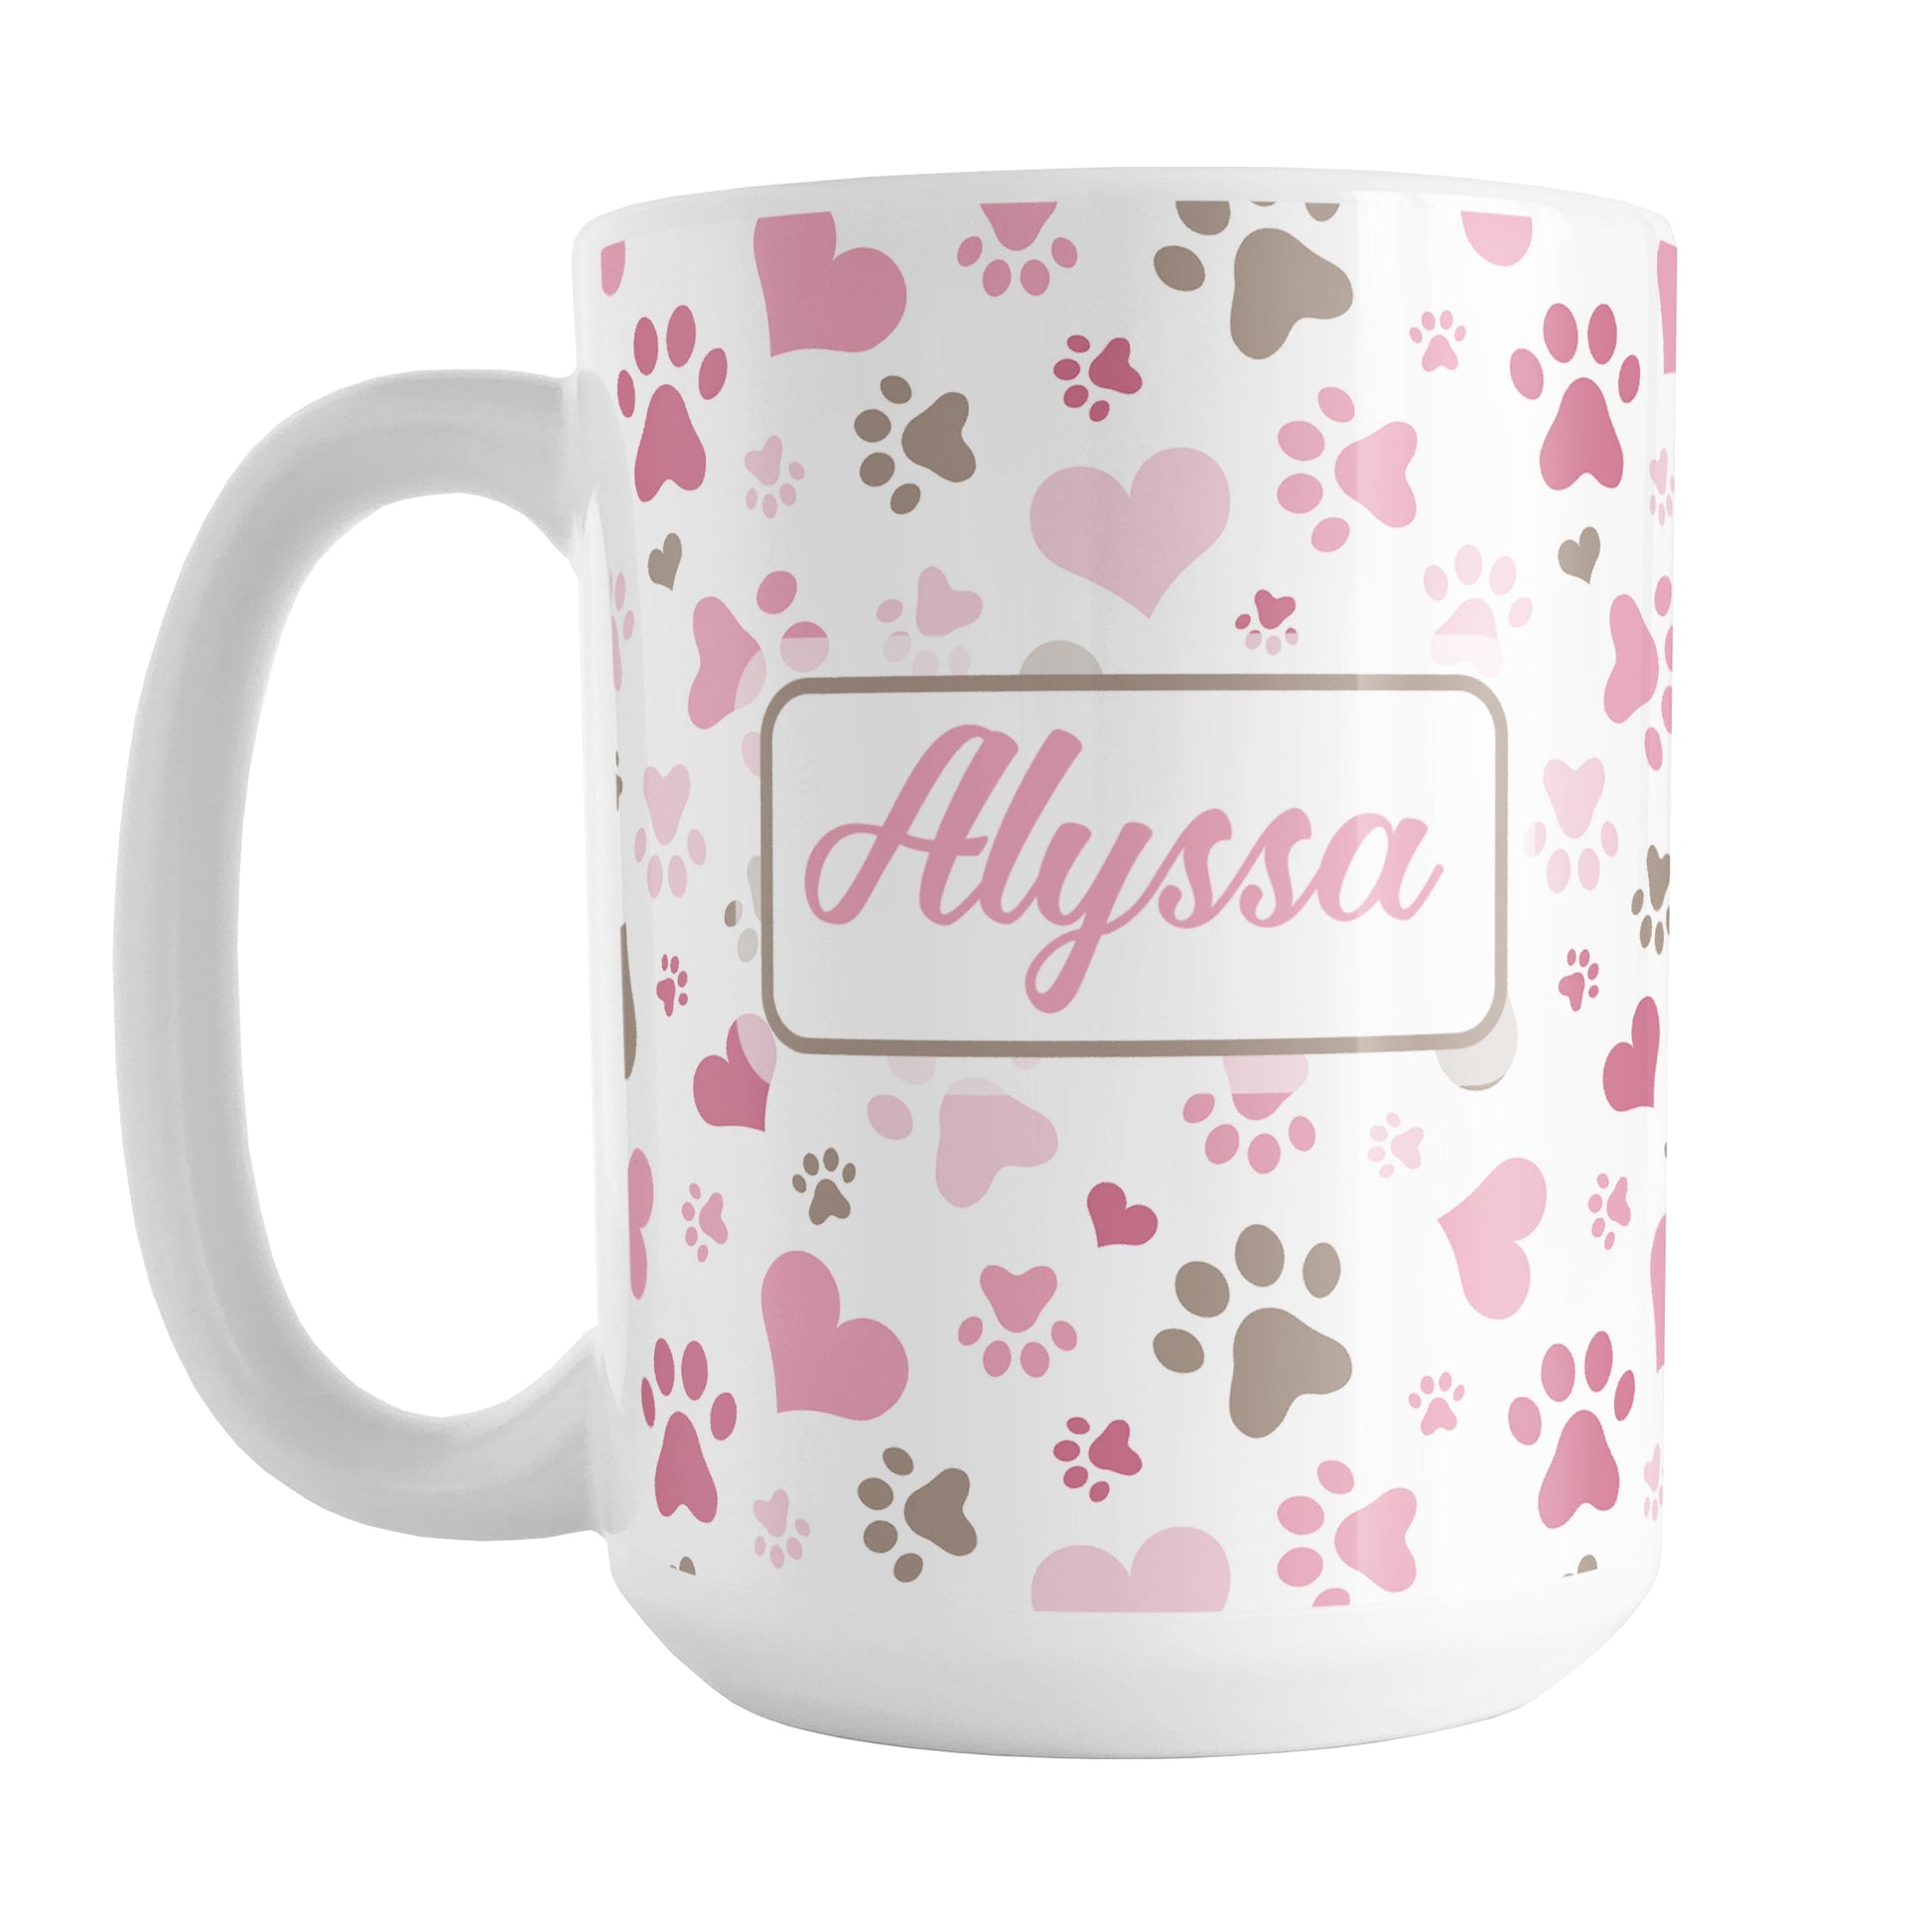 Personalized Pink Hearts and Paw Prints Mug (15oz) at Amy's Coffee Mugs. A ceramic coffee mug designed with a pattern of cute hearts and paw prints in pink and brown that wraps around the mug to the handle. Your name is personalized in pink on both sides of the mug.